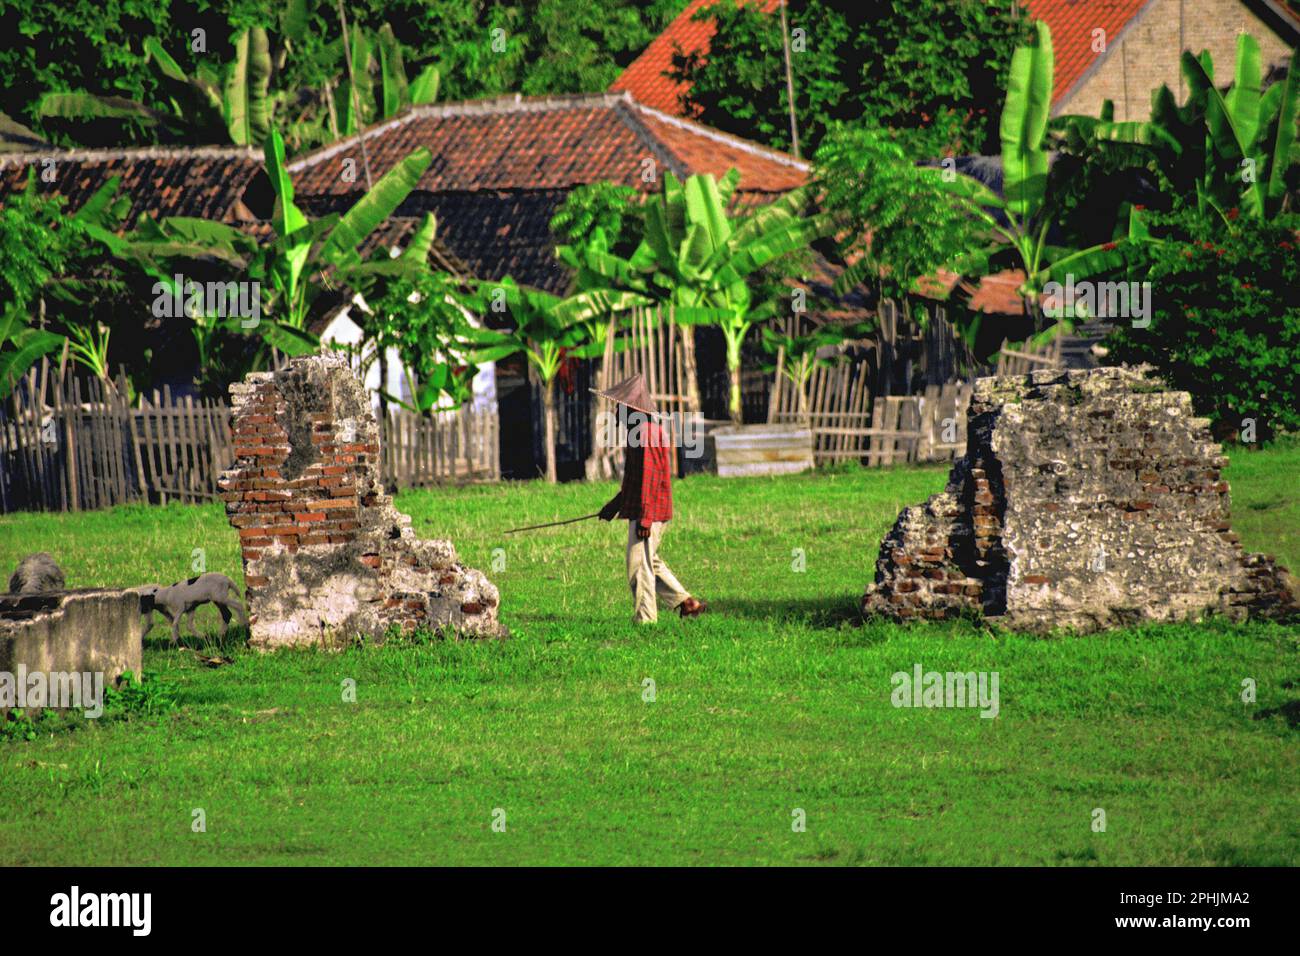 A villager wearing farmer hat is walking on grass field near the ruin of a building at Kaibon palace, one of the cultural heritage objects from Banten Sultanate period located in area now called Banten Lama (Old Banten) in Serang, Banten, Indonesia. 'The sustainability of cultural heritage is strongly linked to the effective participation of local communities in the conservation and management of these resources,' according to a team of scientists led by Sunday Oladipo Oladeji in their research article published on Sage Journals on October 28, 2022. Stock Photo